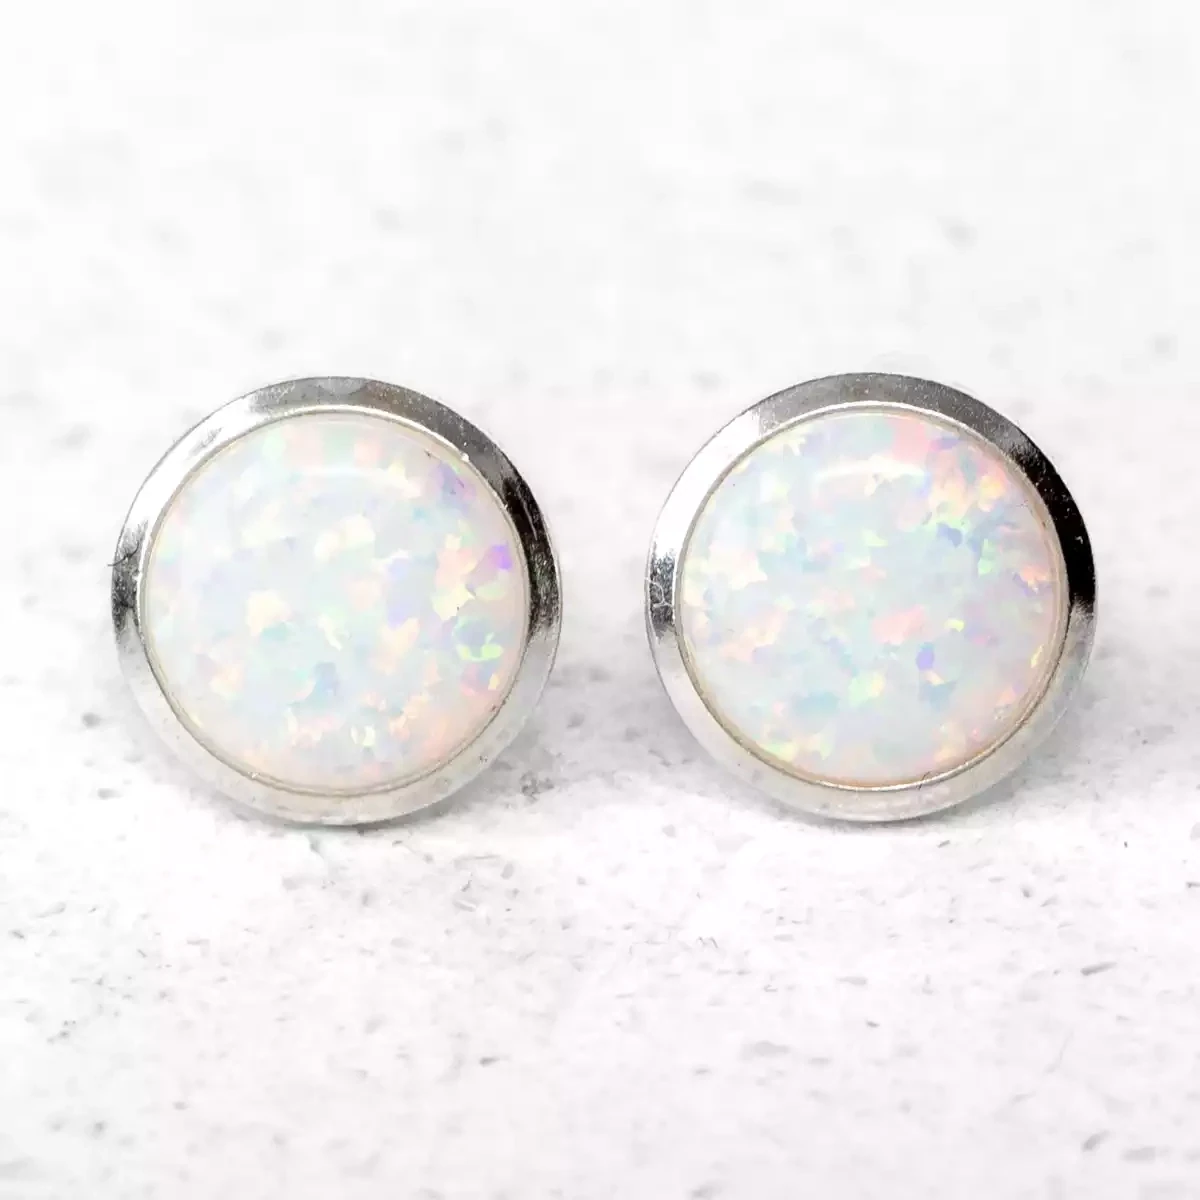 White Opalite and Silver Round Studs - 10mm by Lavan